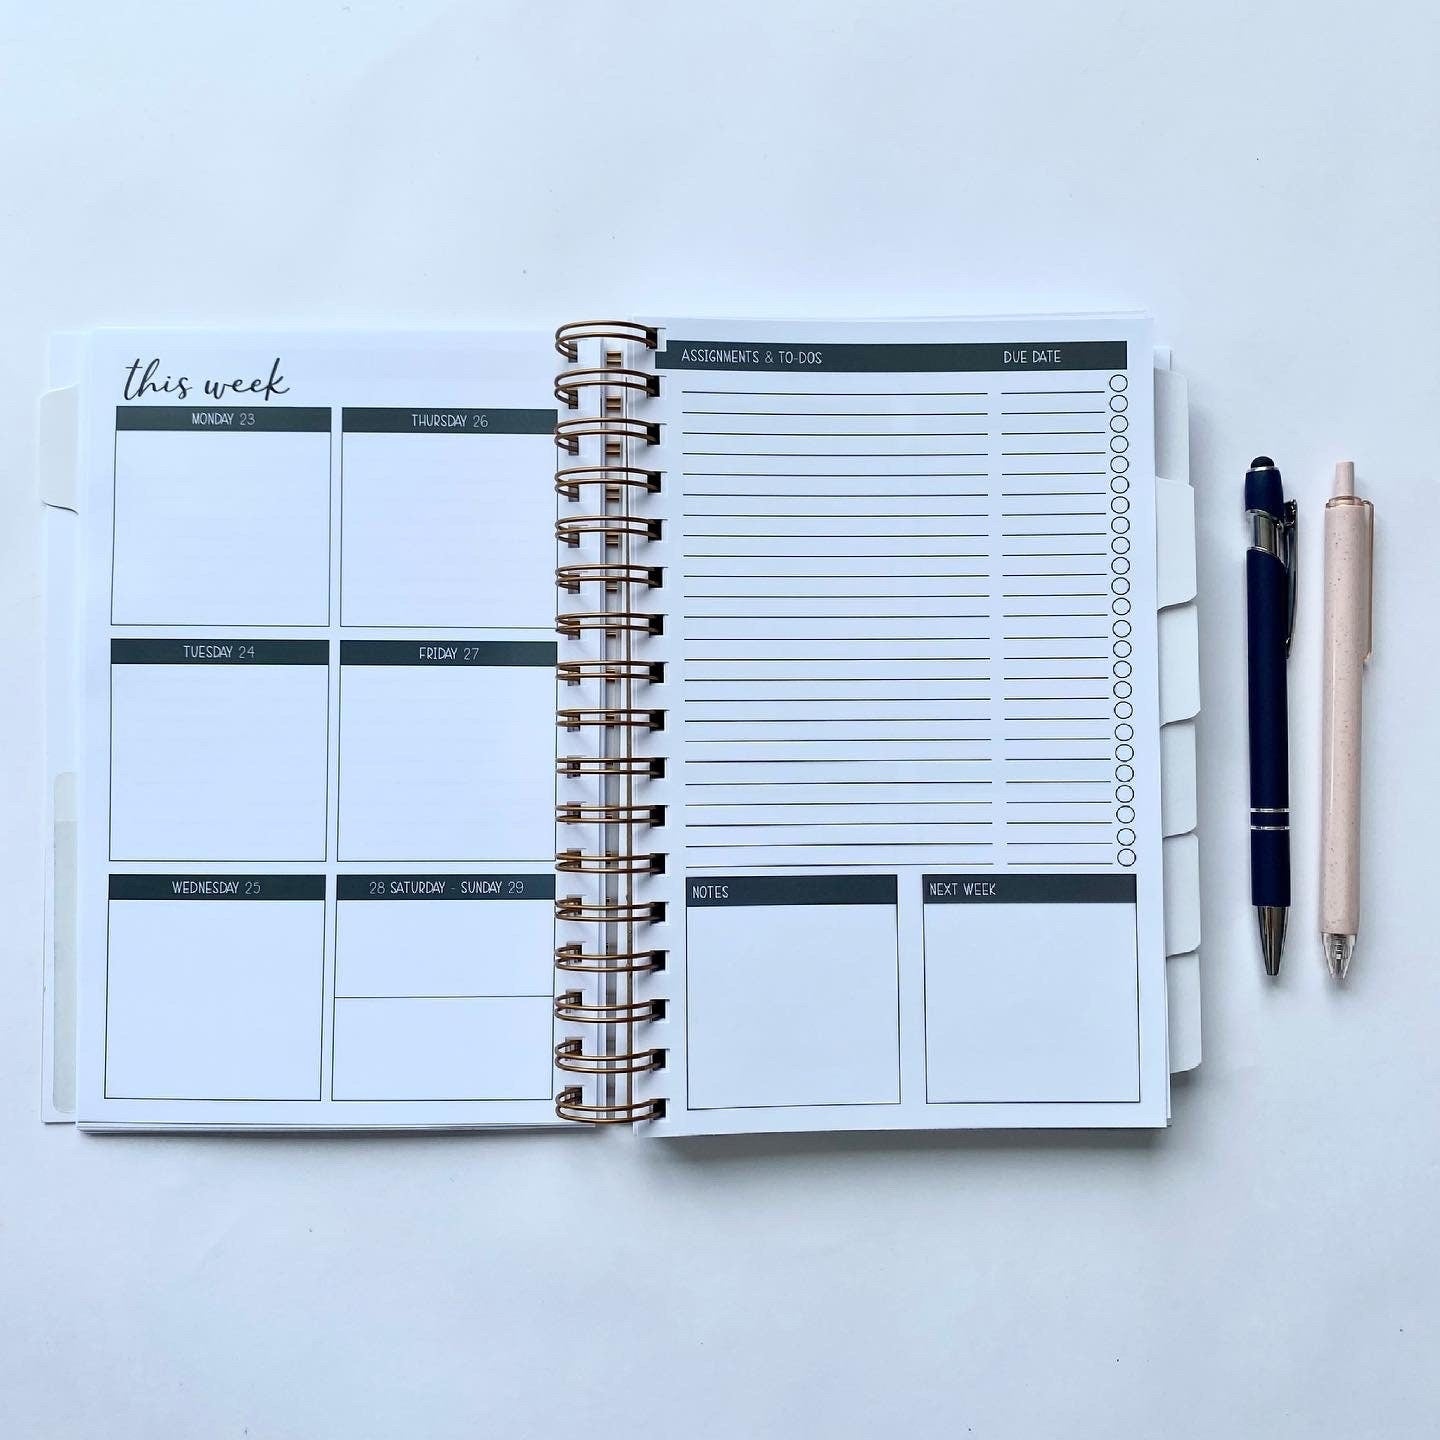 Academic Student Planner - Gem of a Year - Student Planning - Student Organization - 2021 School Year Planner - Academic Planner